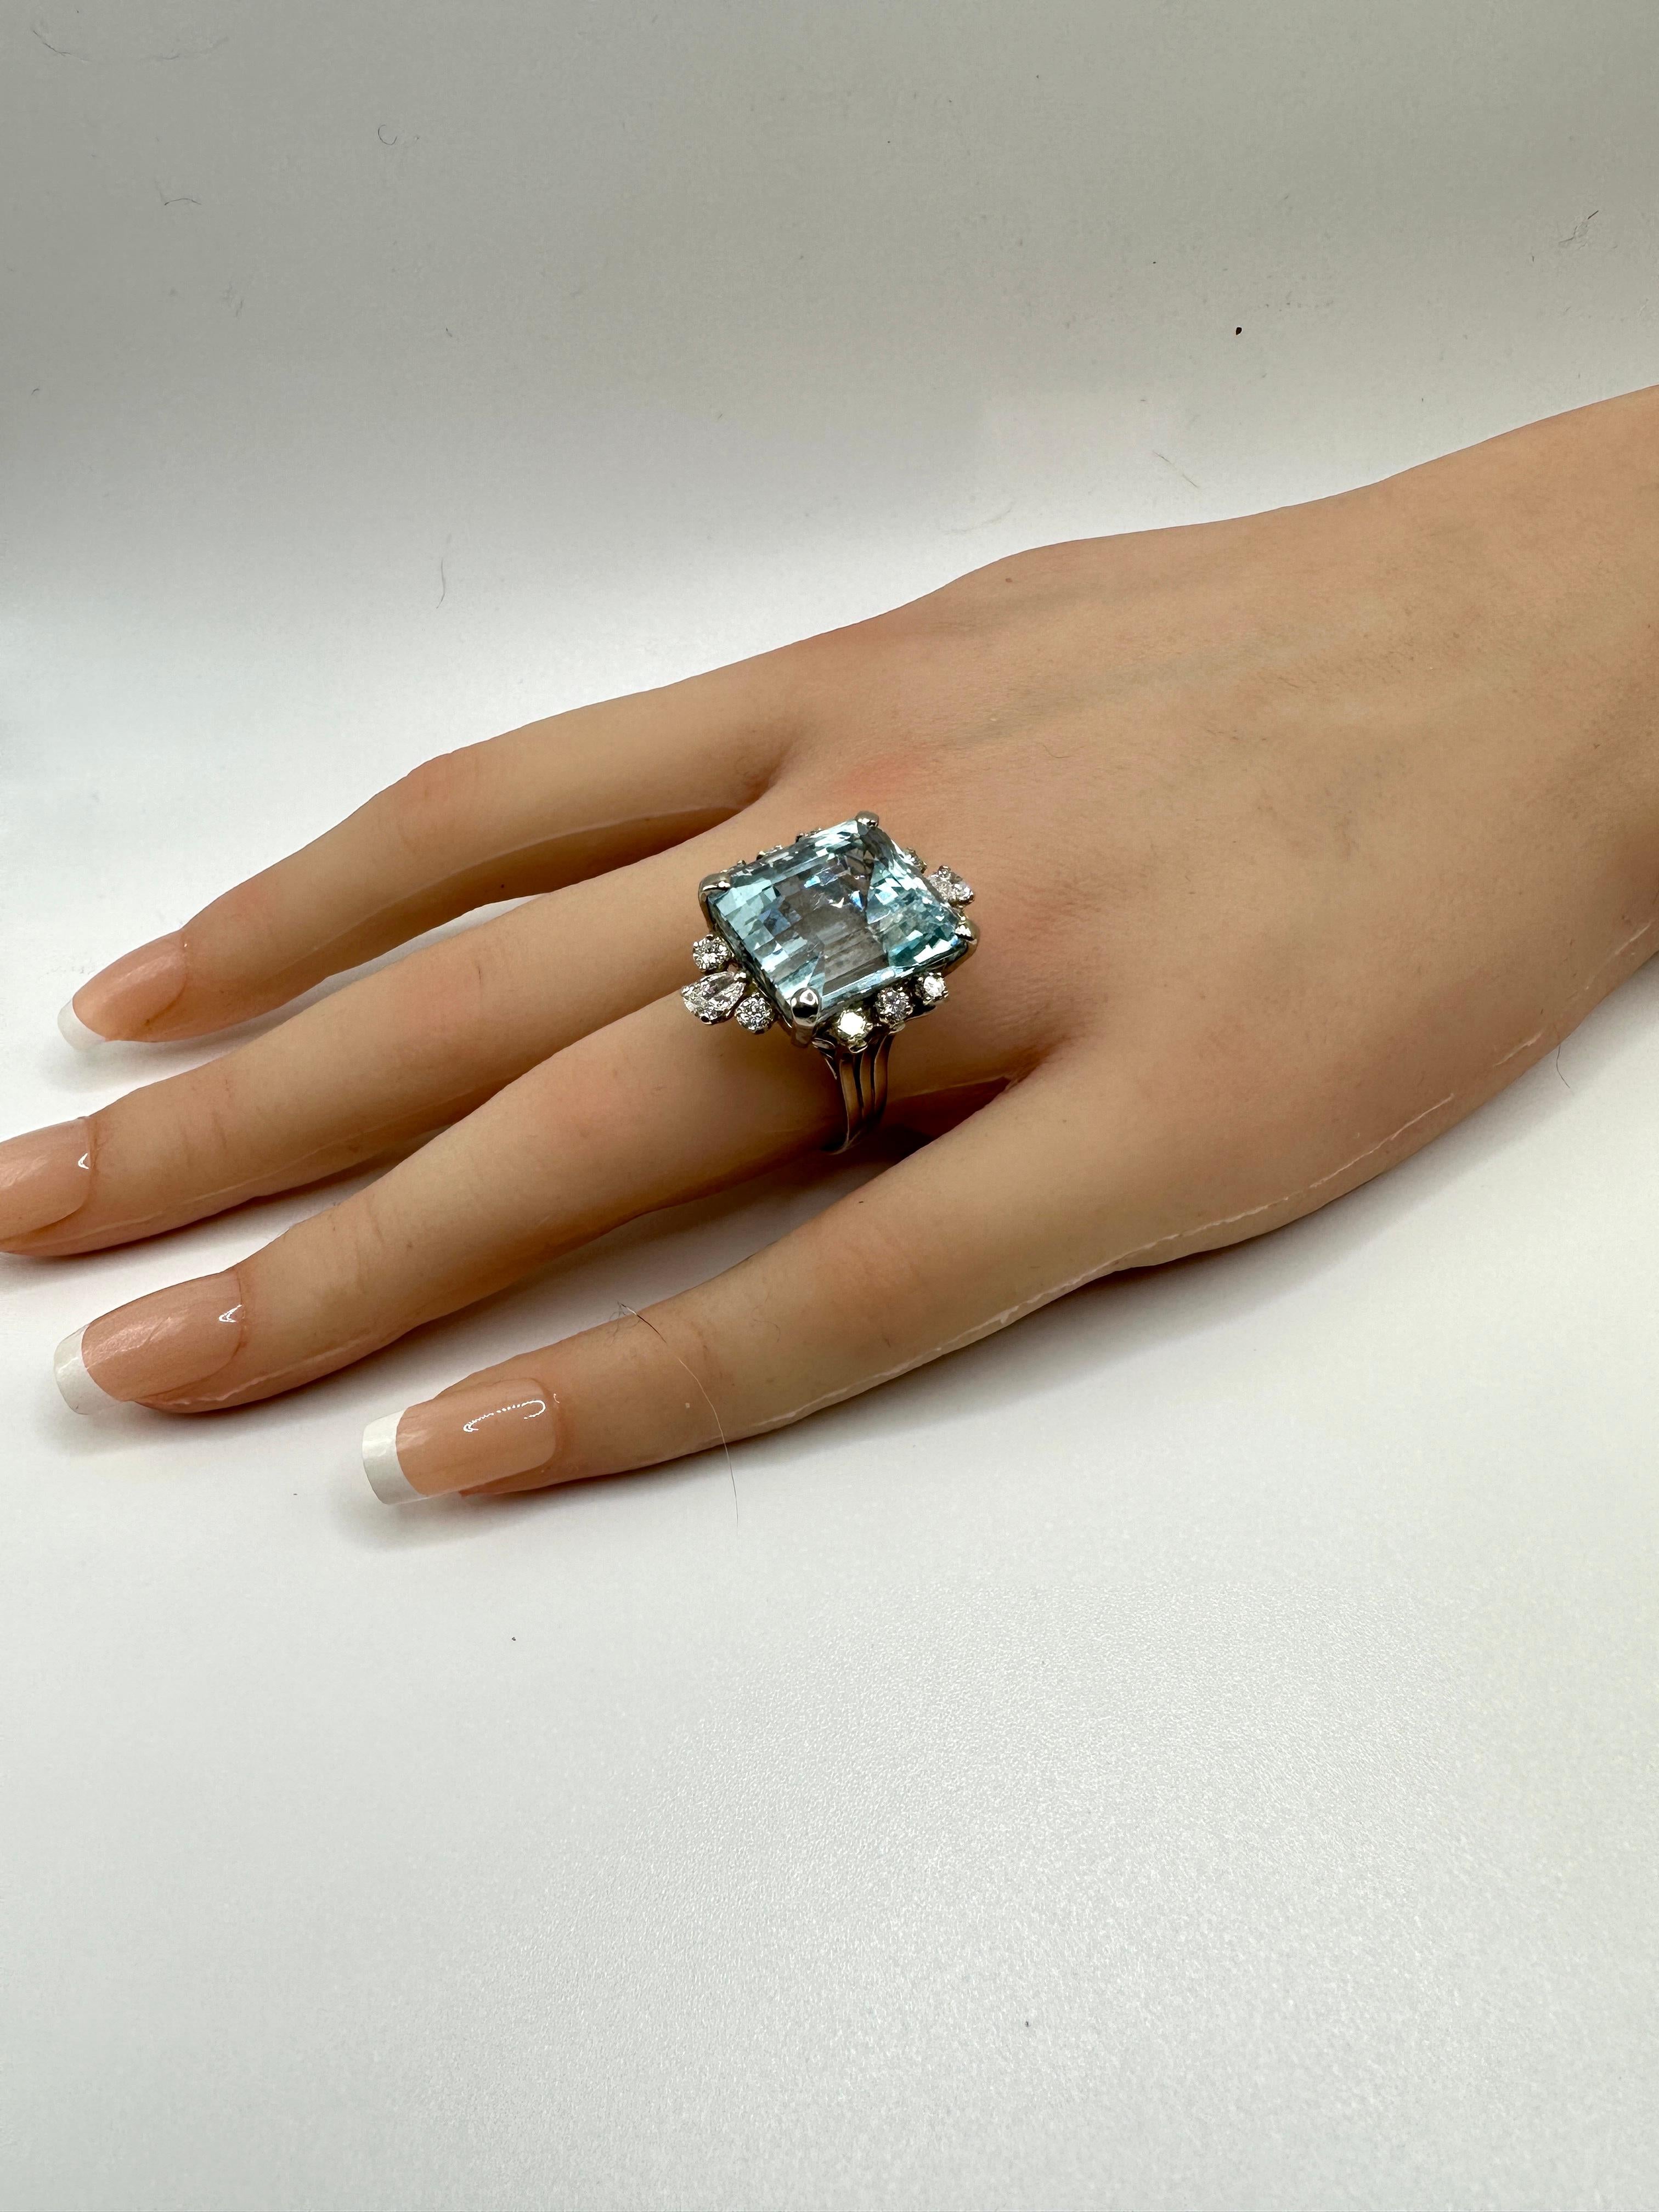  Dazzling Cocktail ring!  20.83 carat Emerald cut aquamarine set in 14k white gold.  Surrounded  by two pear shape brilliant cut Diamond on top and bottom along with 10 round brilliant diamonds totaling 1.38 carats.  Total weight 10.60g.  In